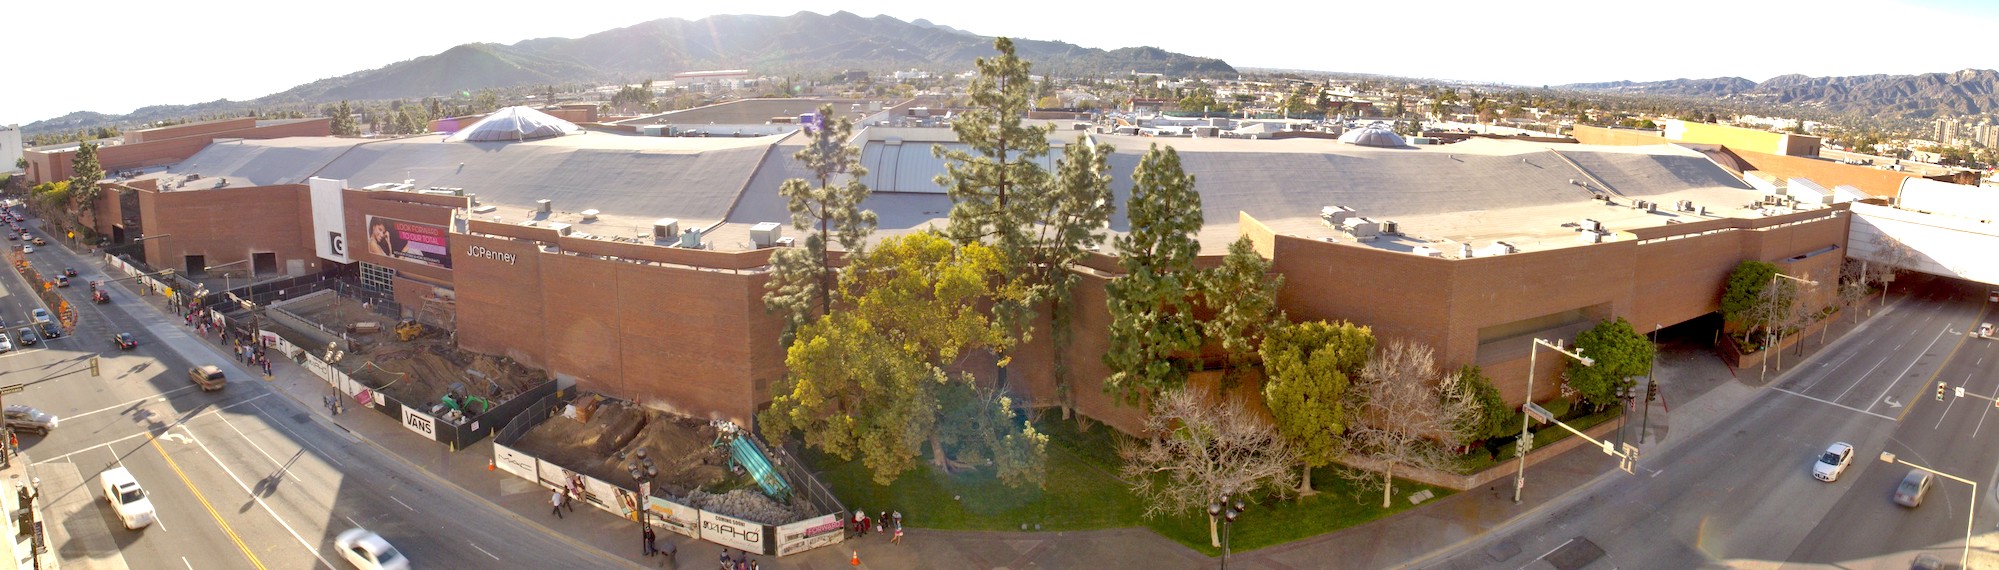 View of the Glendale Galleria building with hills in the background